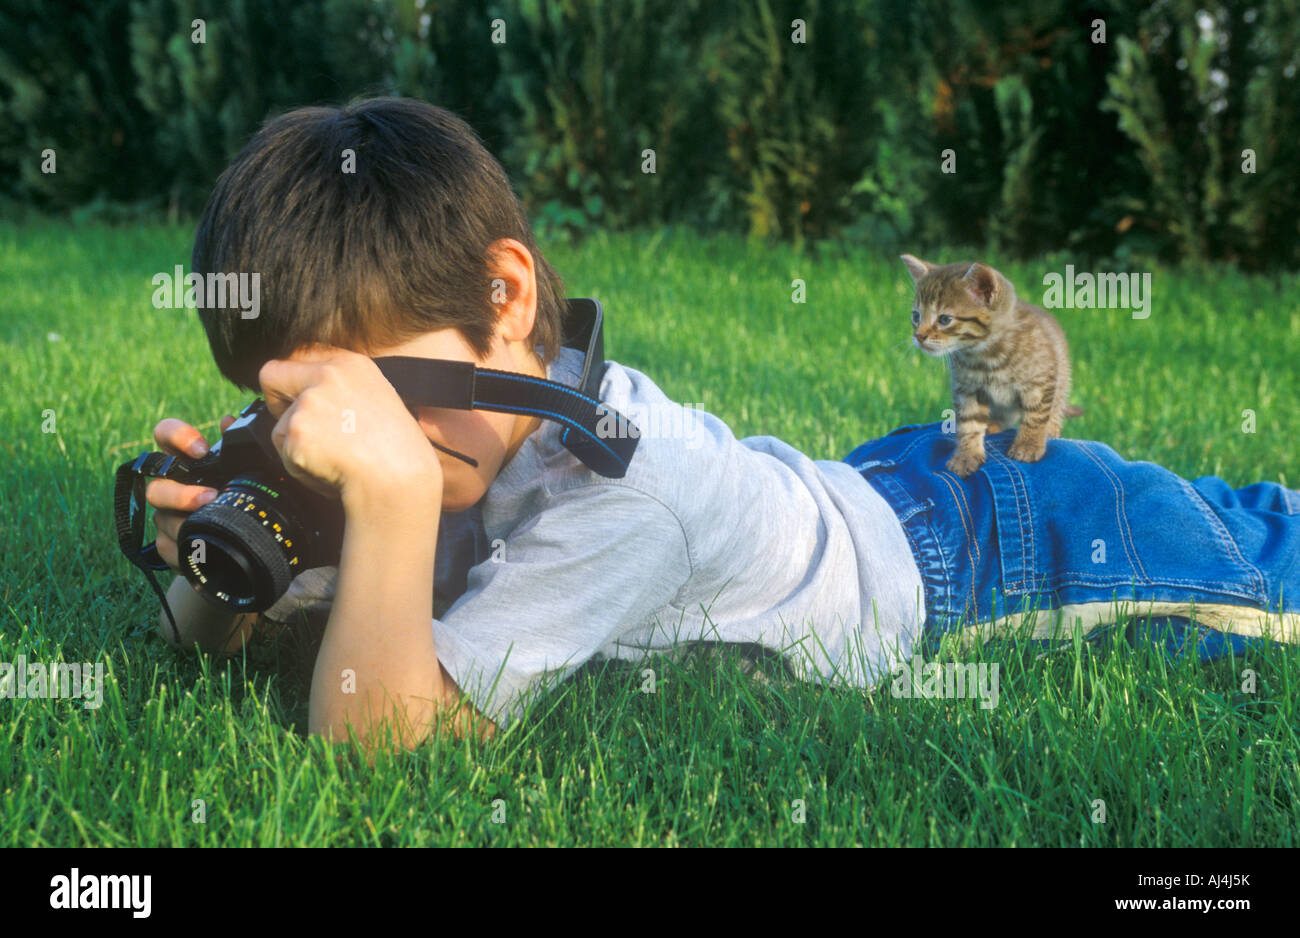 a young boy is lying on a lawn taking photographs while a nosy kitten is sitting on his back watching him Stock Photo